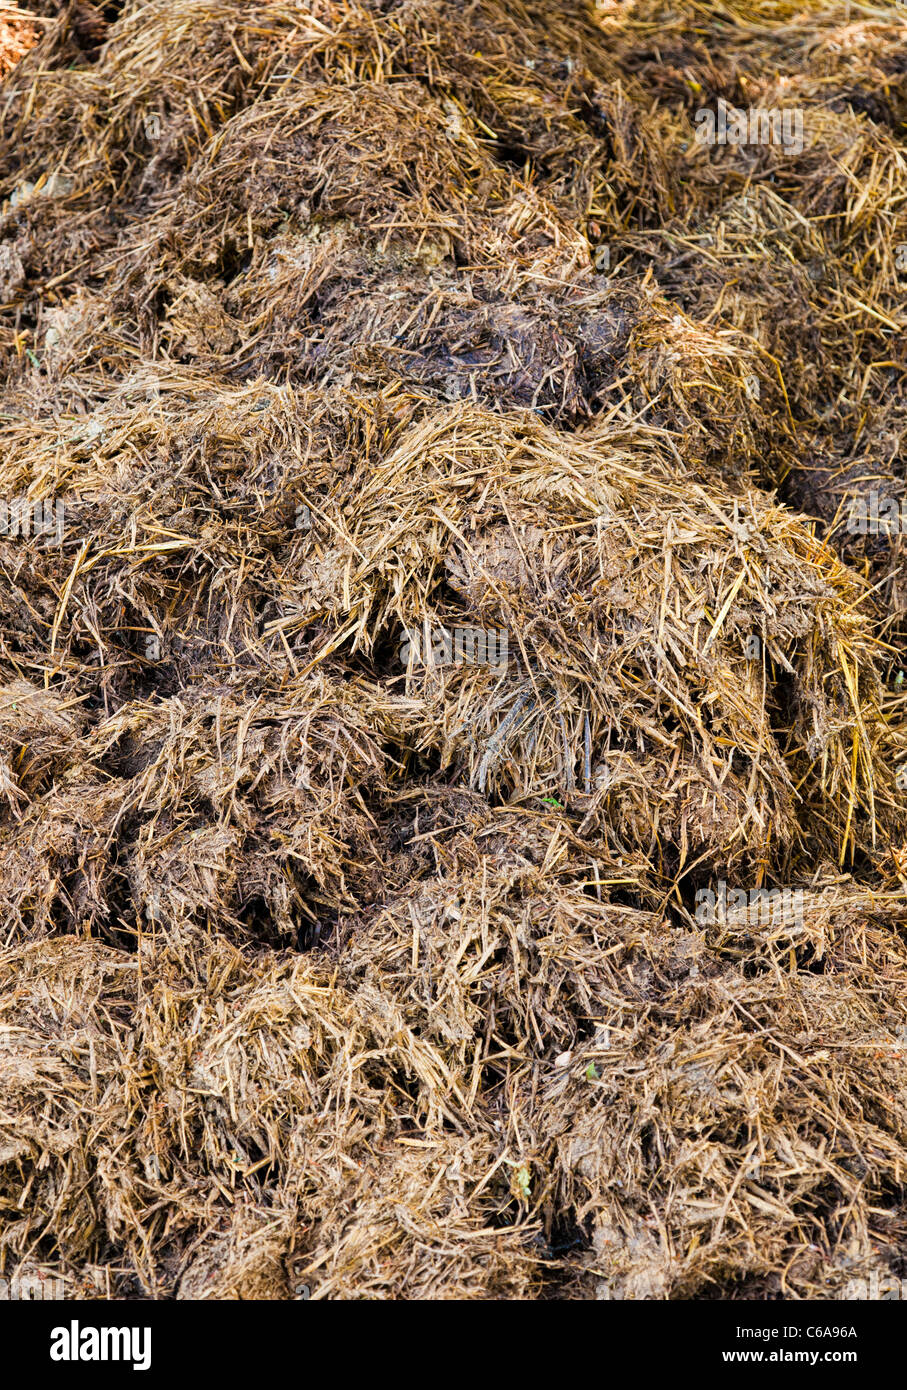 Pile of manure Stock Photo